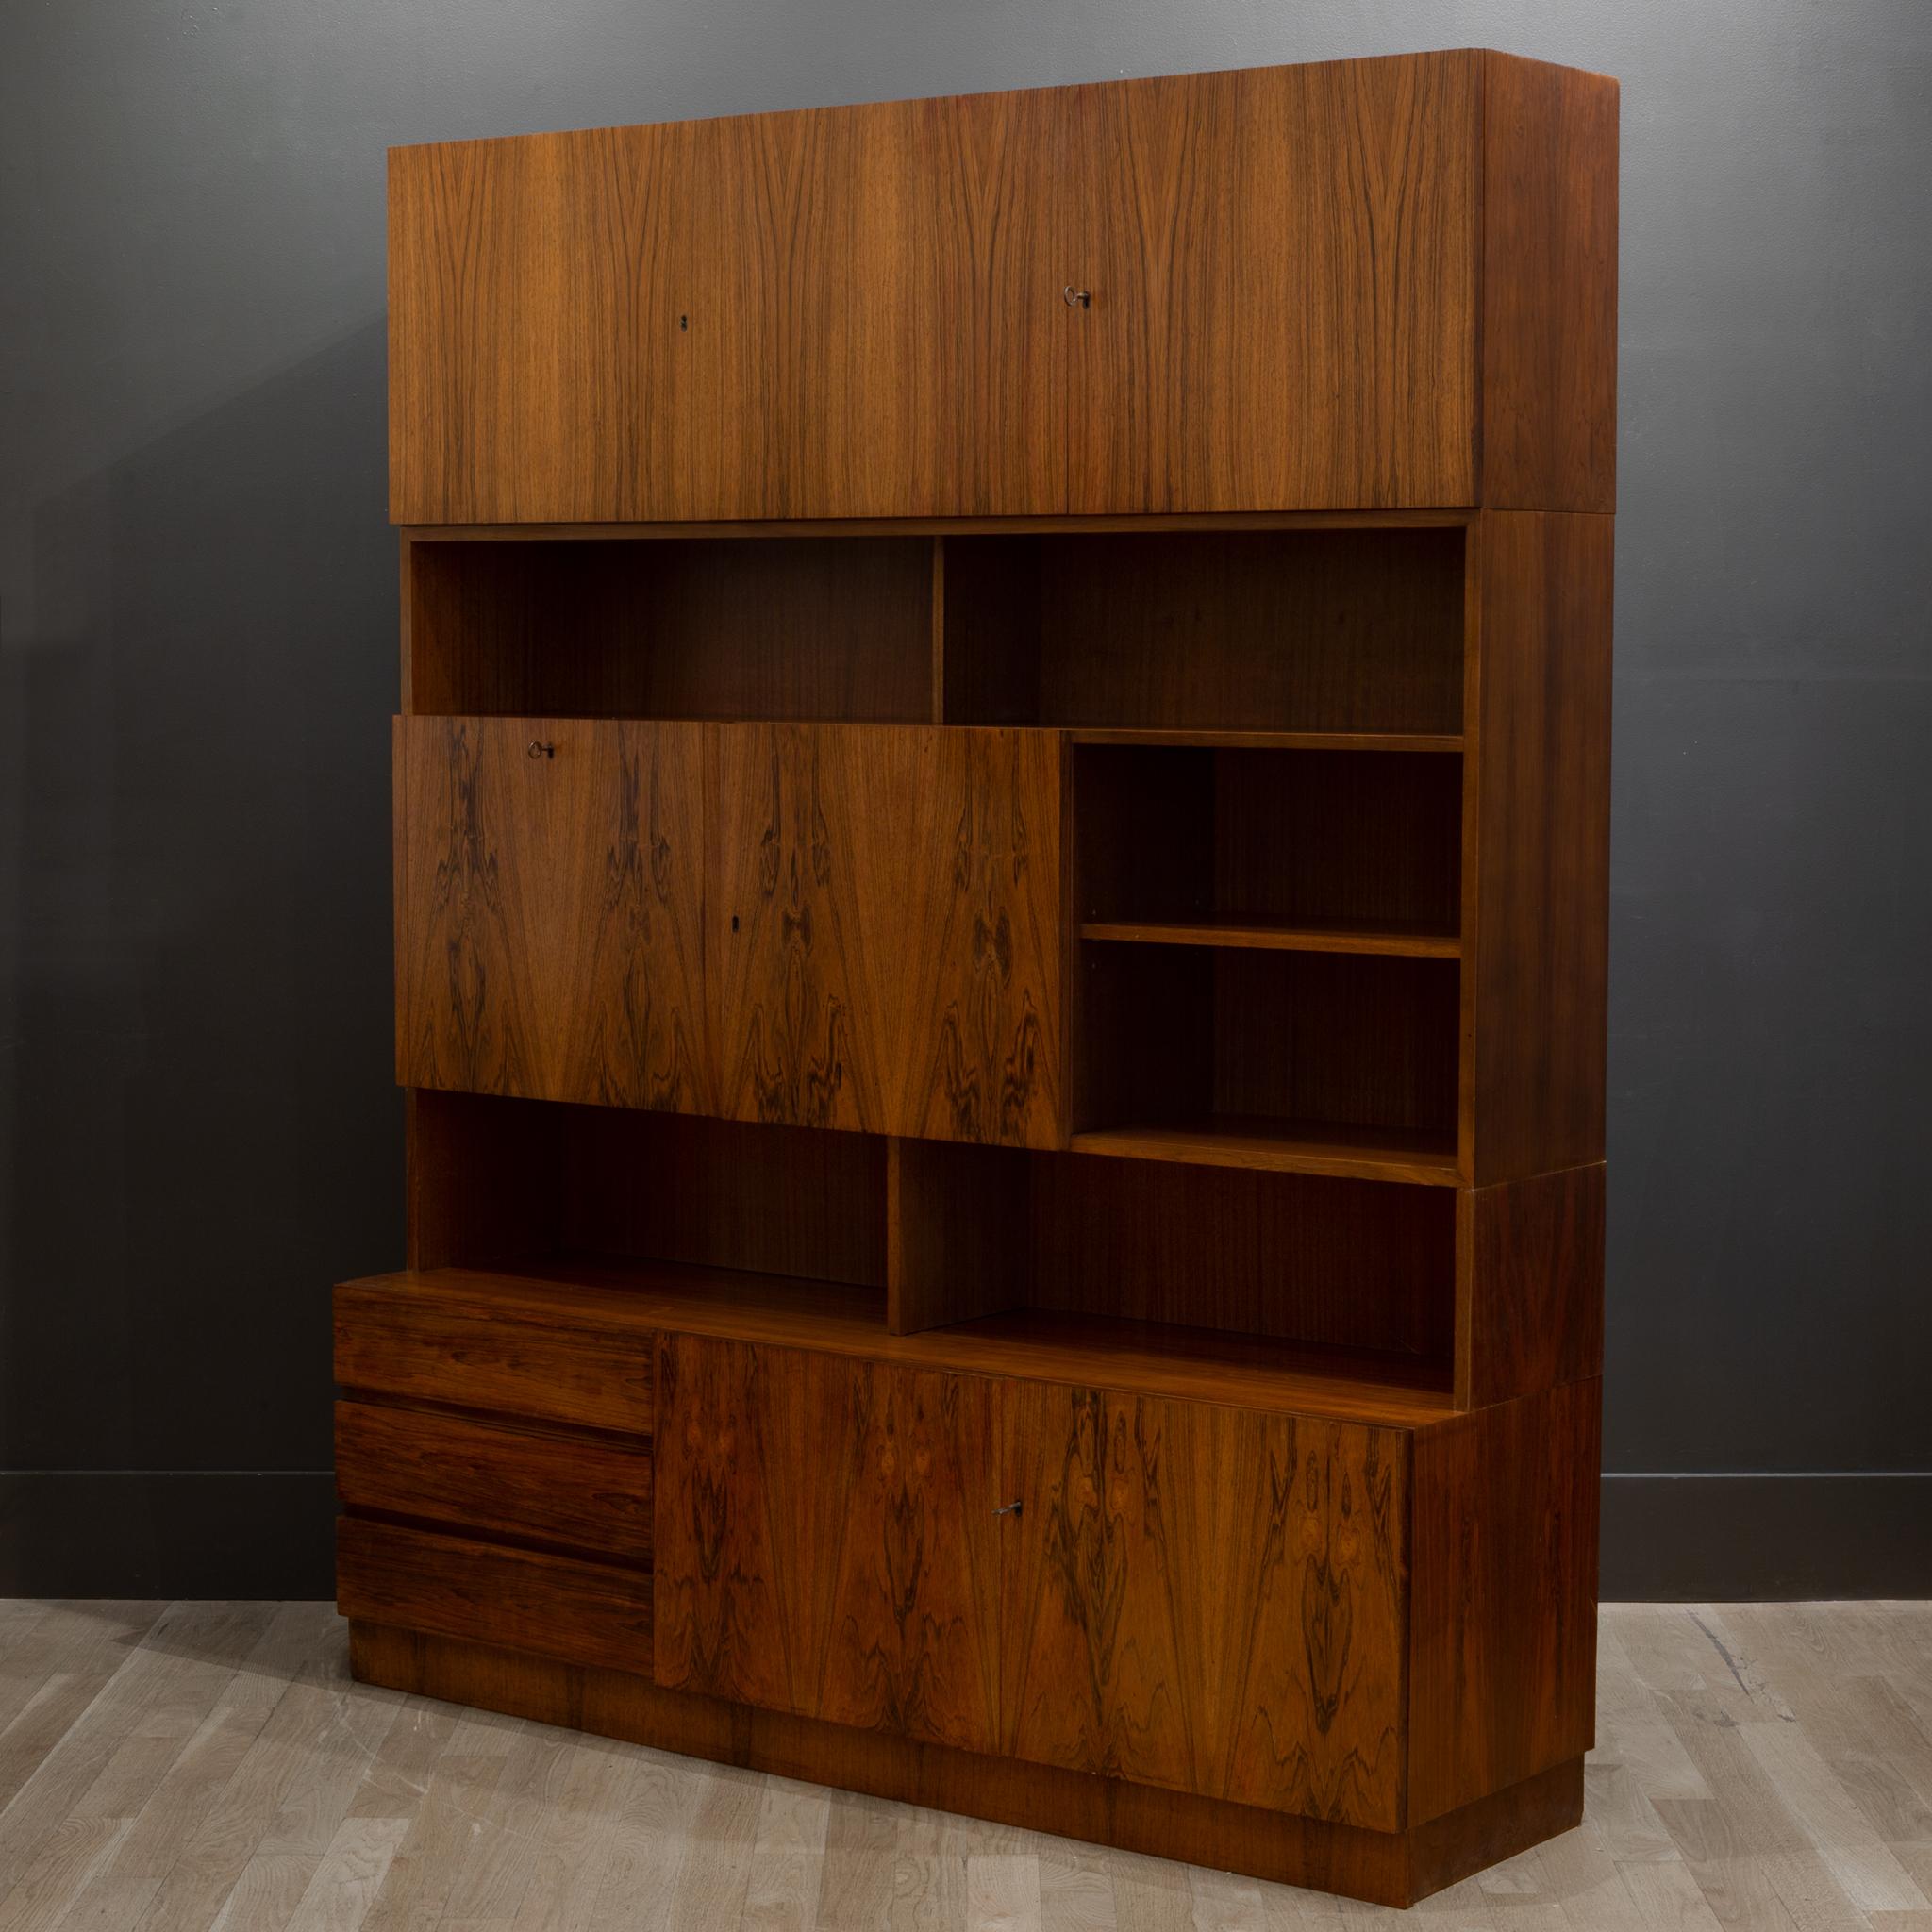 German Midcentury Rosewood Modular Wall Unit Designed by Georg Satink for WK Mobel c